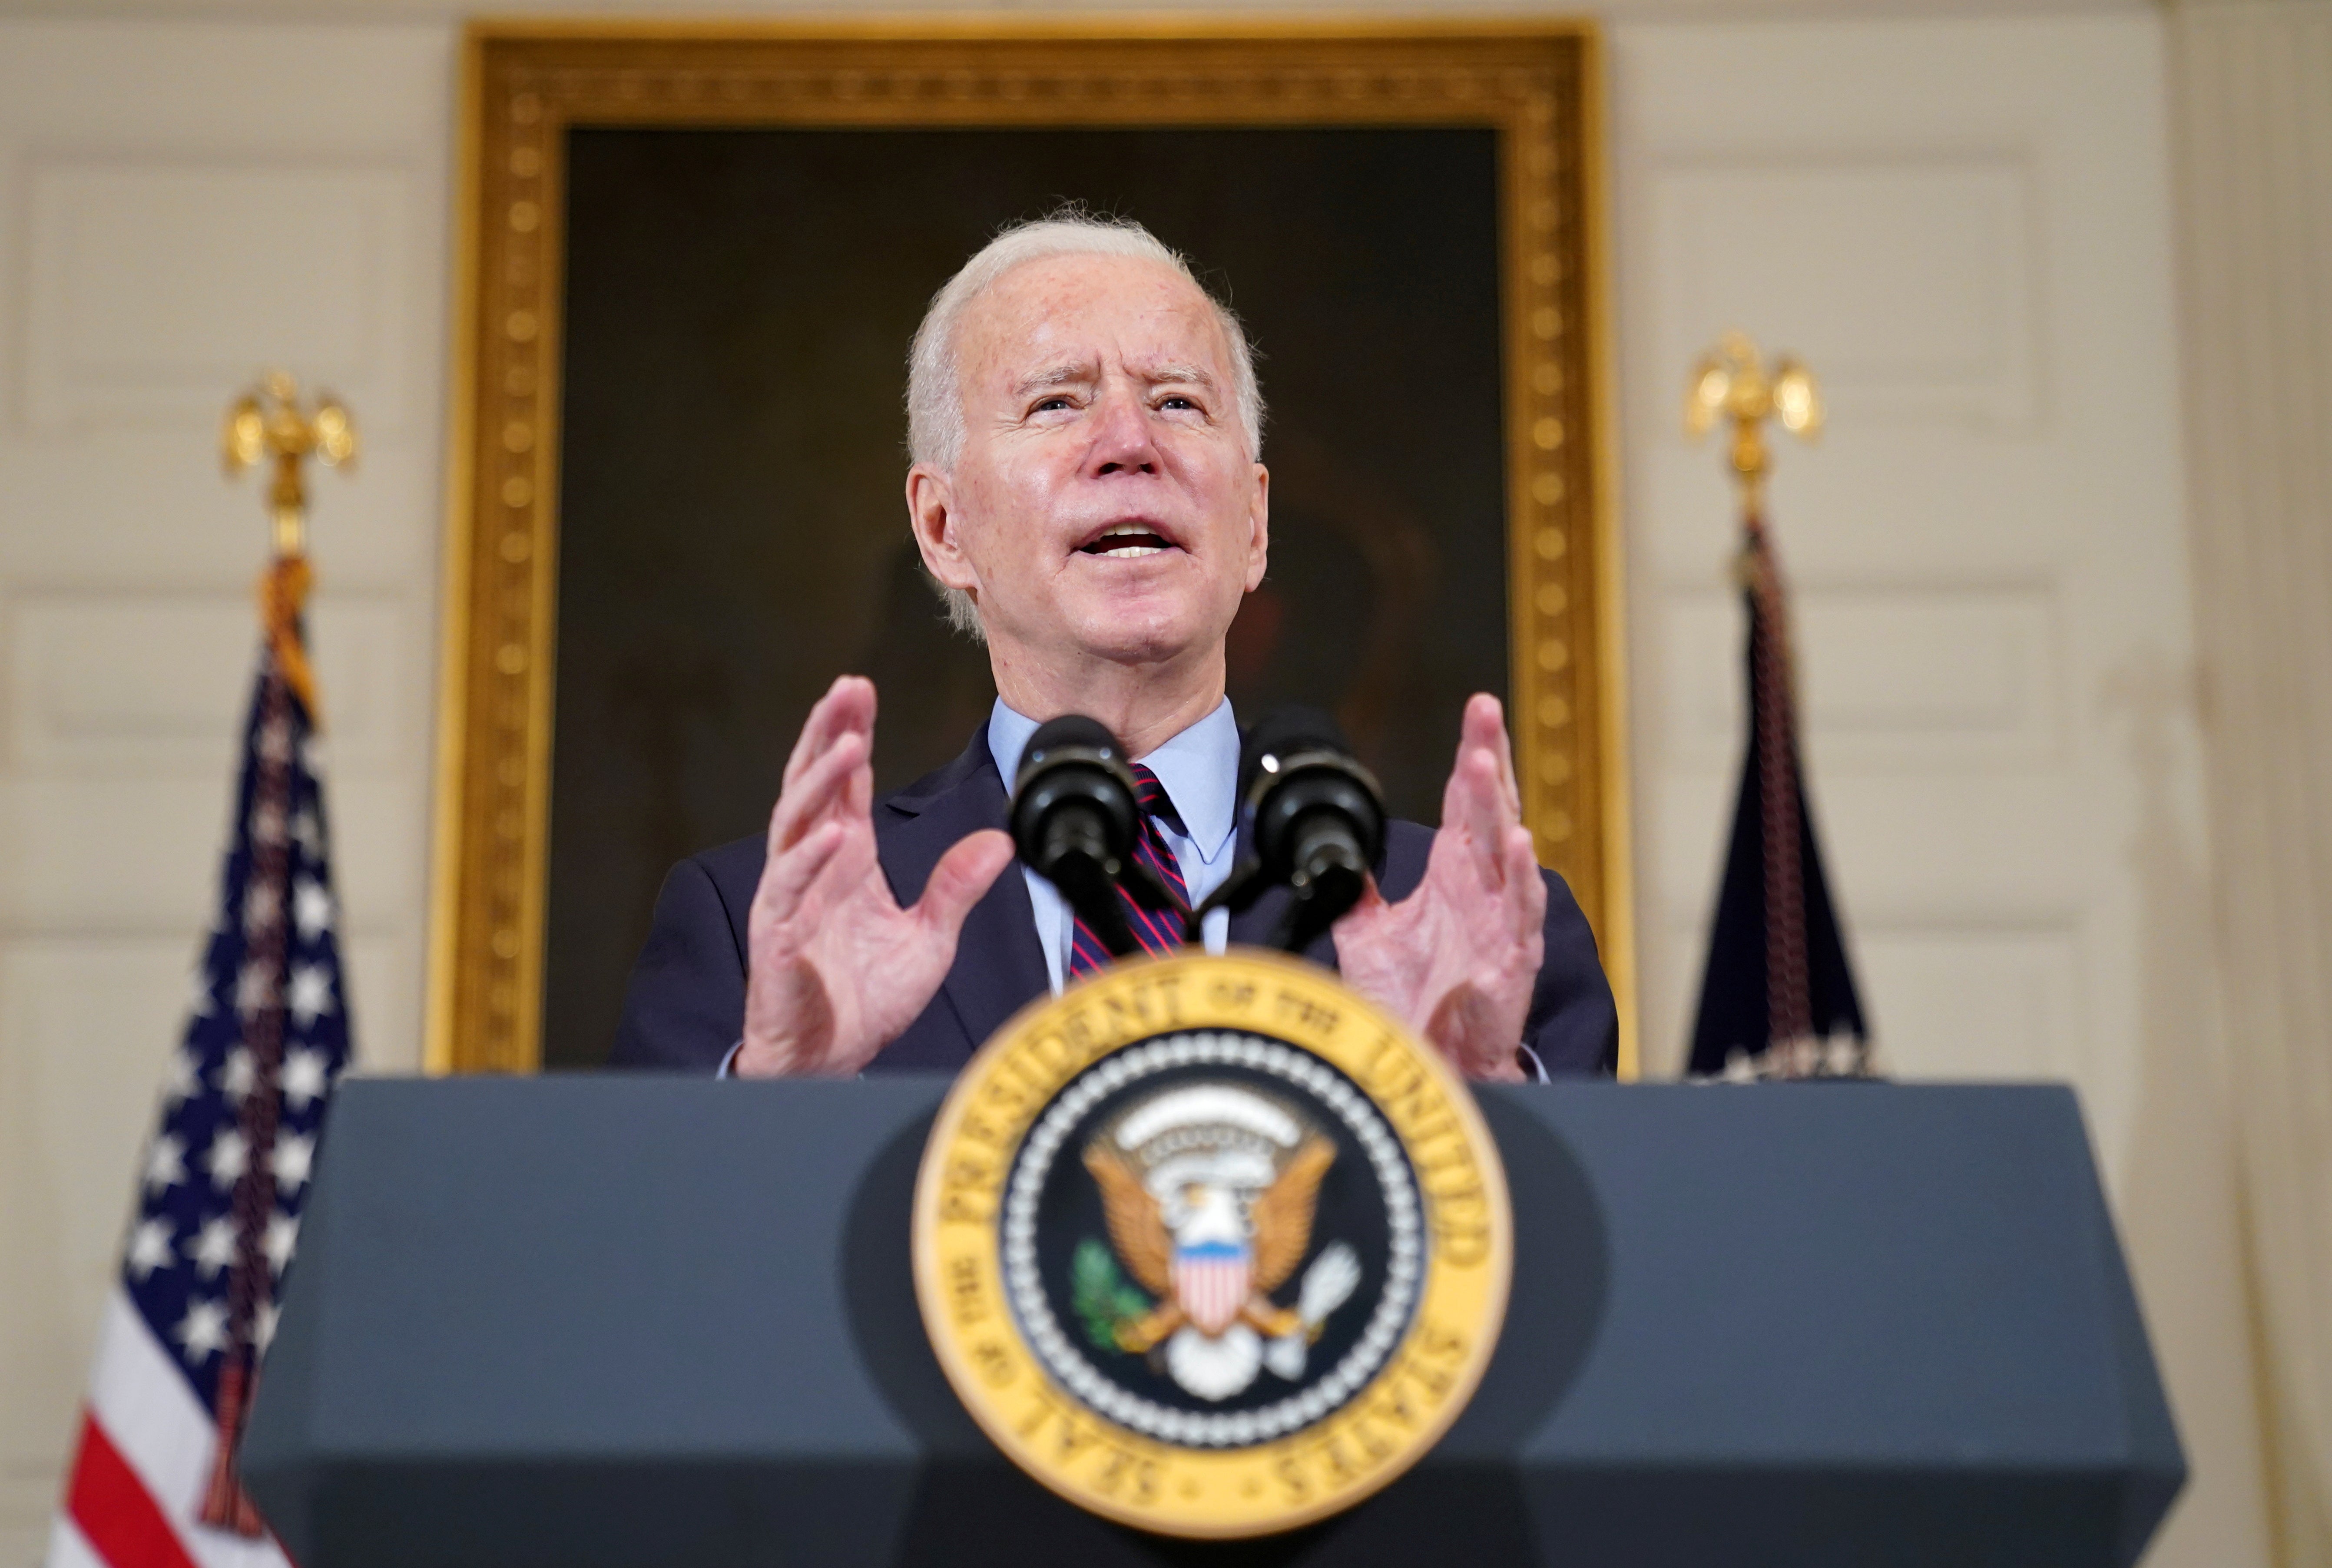 'Biden’s's current climate plan sees him picking up from where he left off as vice president'